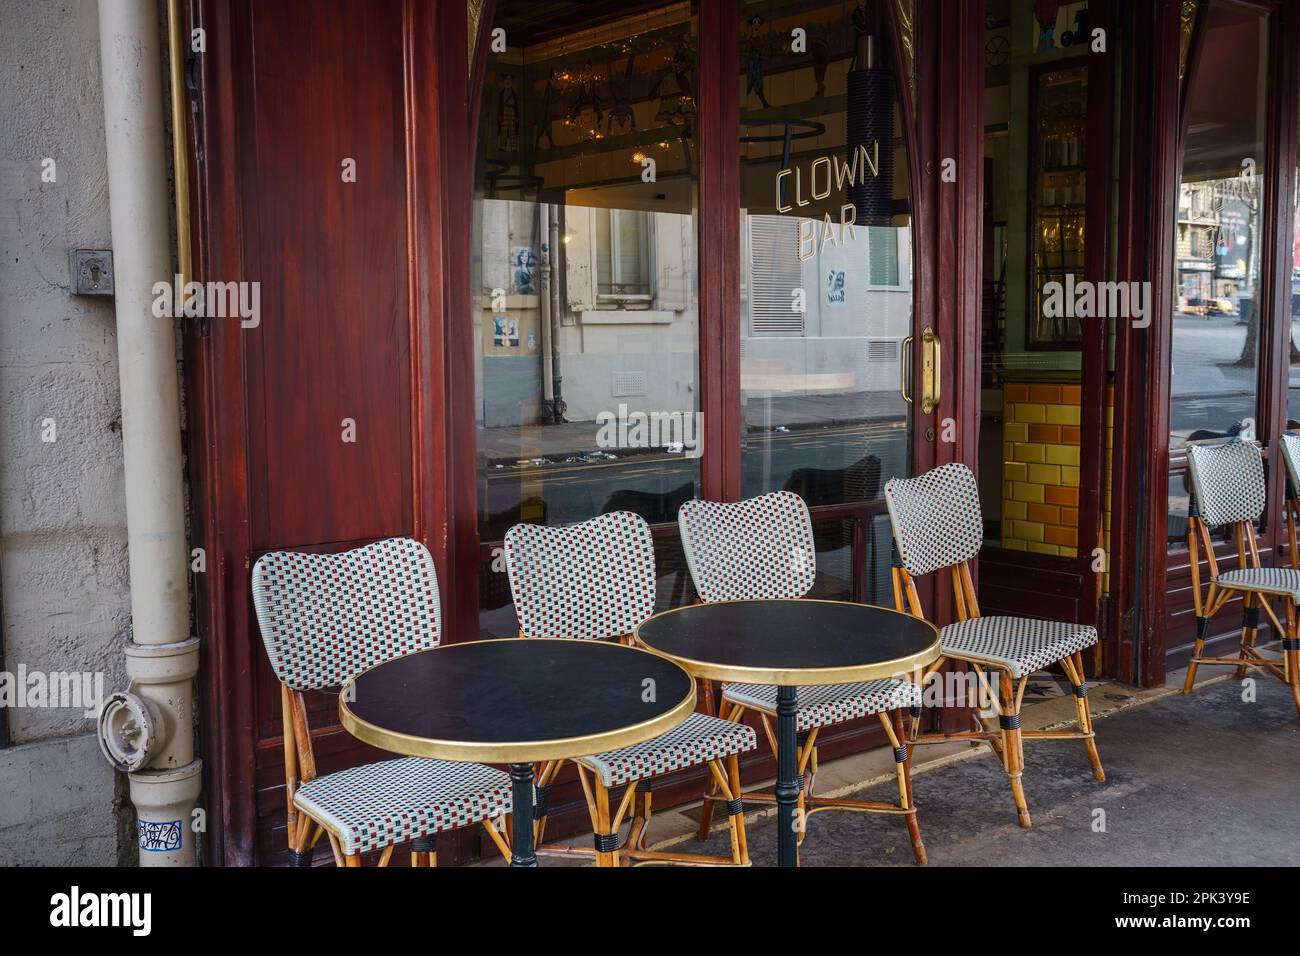 Tables and chair outside Le Clown Bar Restaurant in Paris, France. March 24, 2023. Stock Photo